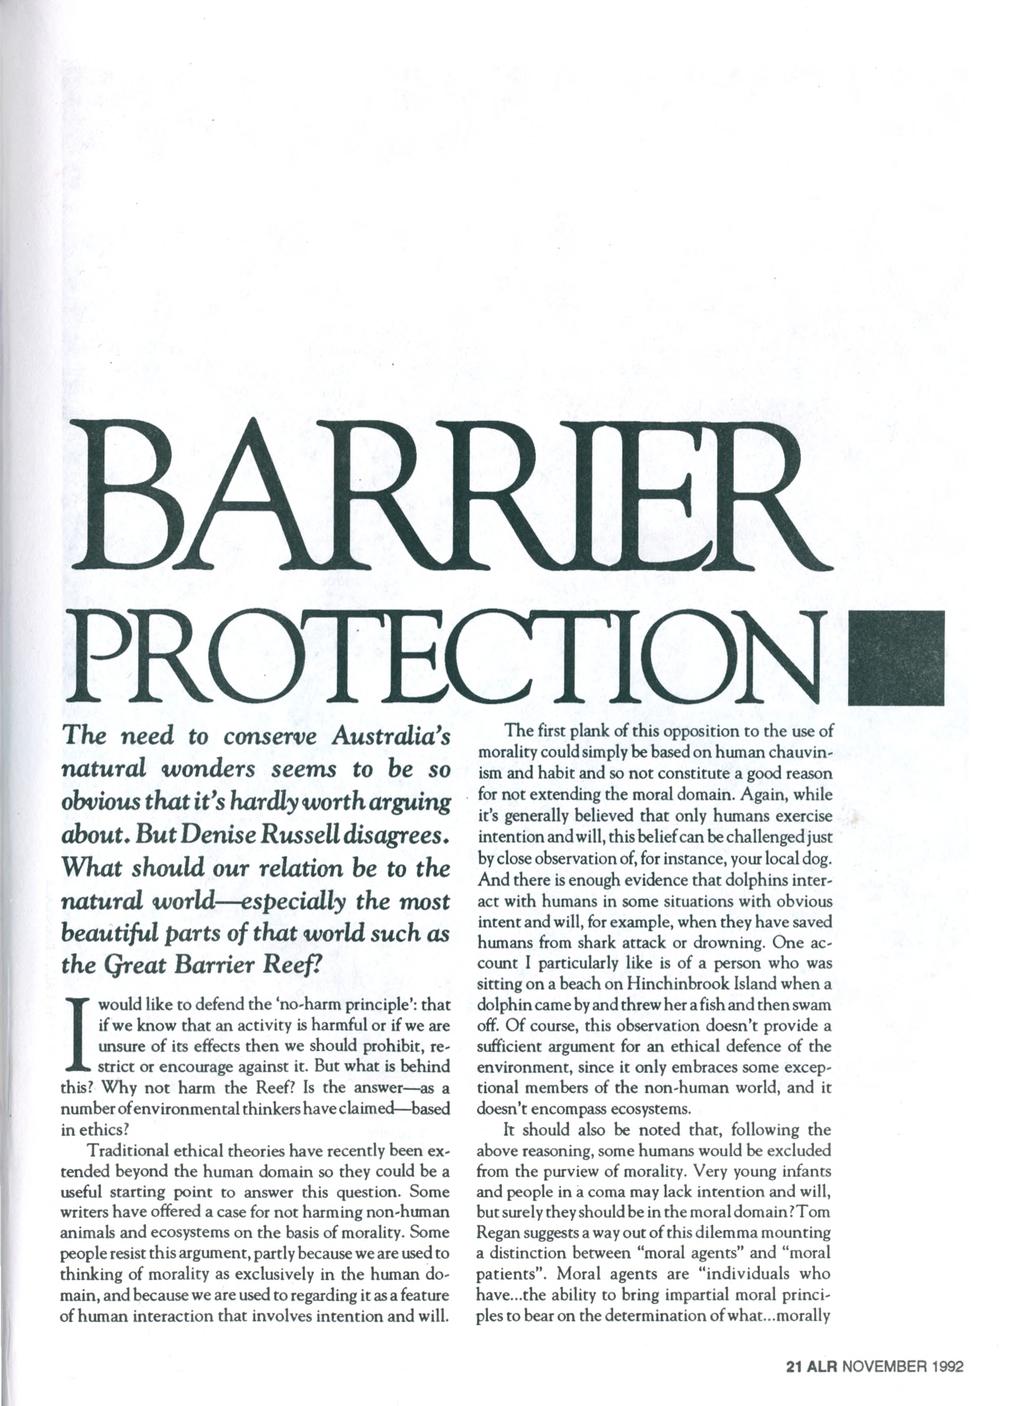 BARRIER PROTECTION The need to conserve Australia s natural wonders seems to be so obvious that it s hardly worth arguing about. But Denise Russell disagrees.